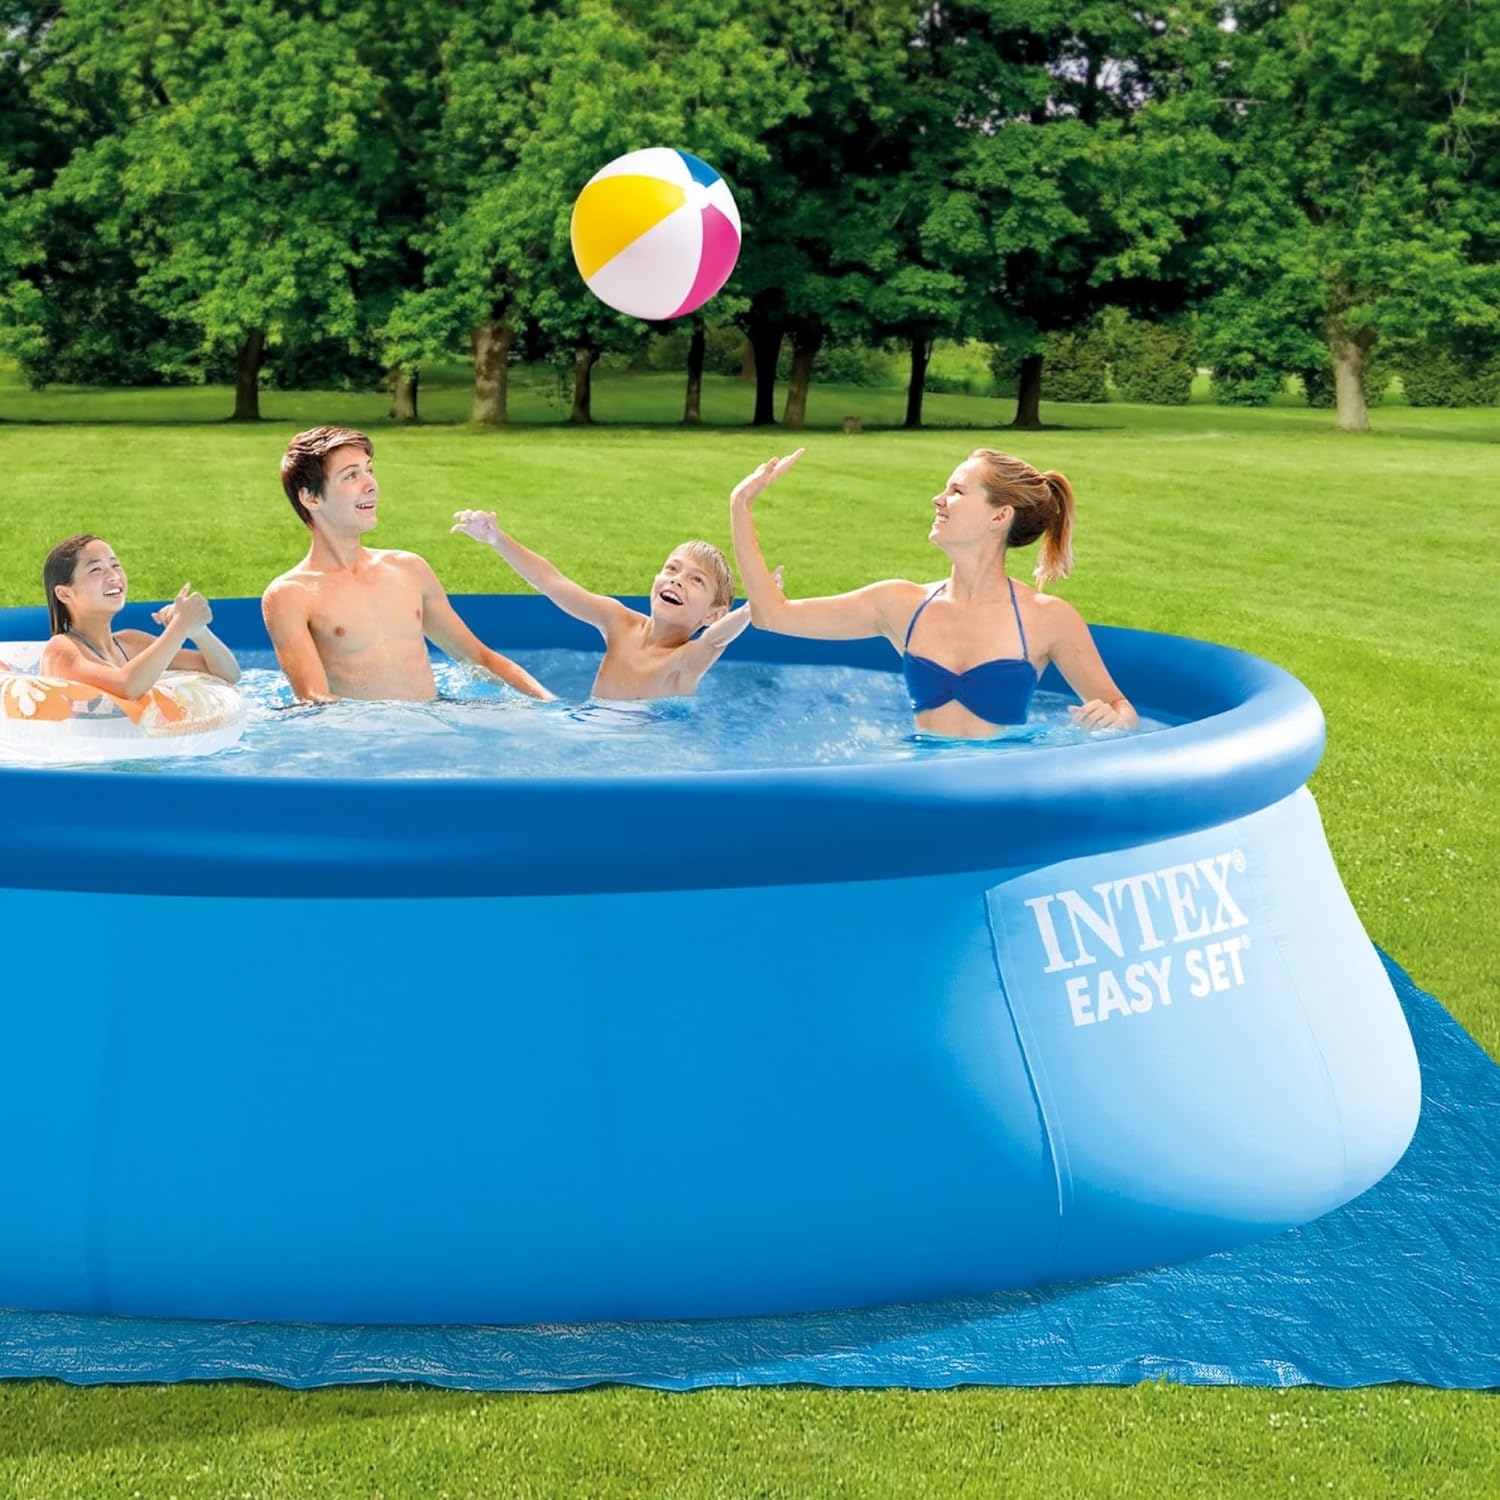 Family enjoys an INTEX Easy Set inflatable pool in a backyard, playing with a beach ball